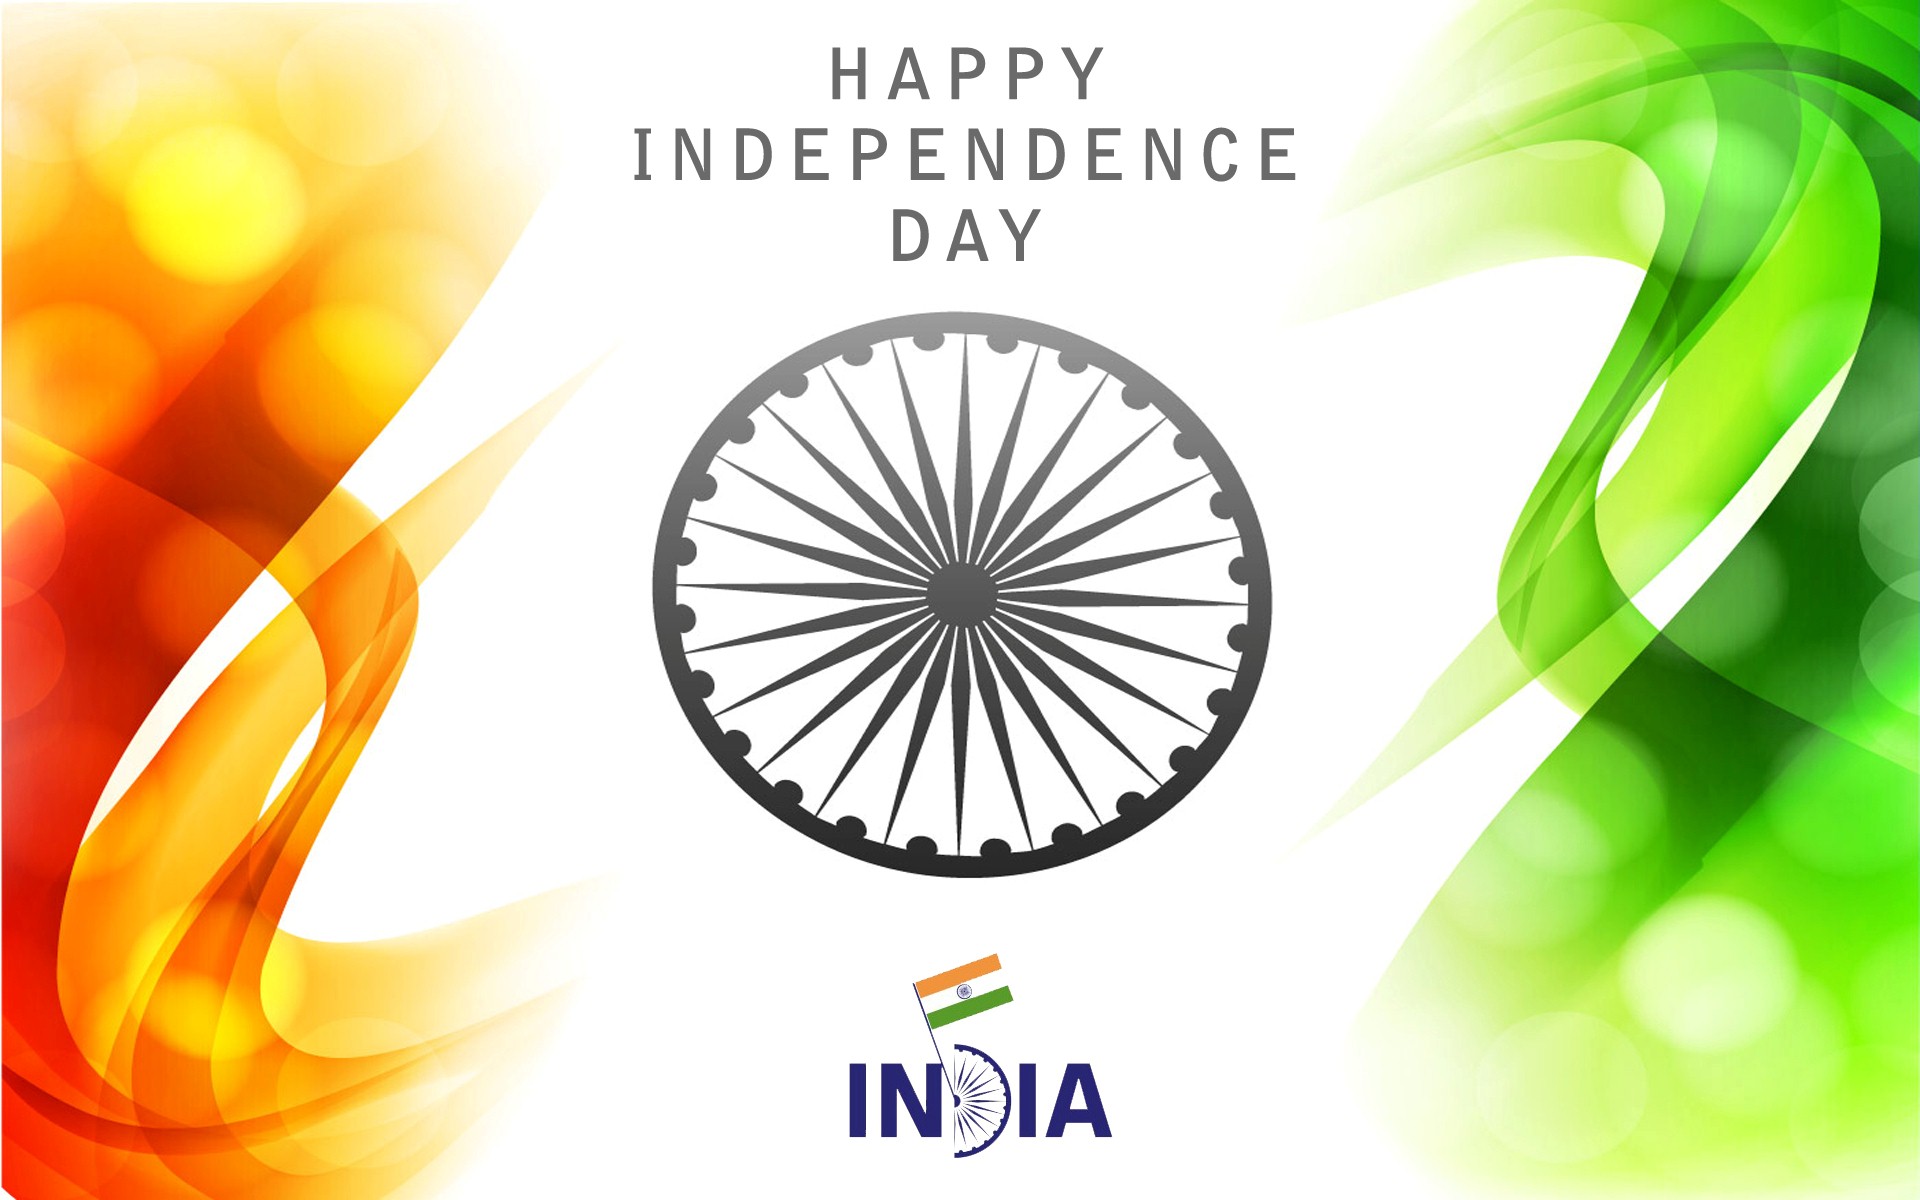 Happy Independence Day Wallpaper - Background Independence Day India - HD Wallpaper 